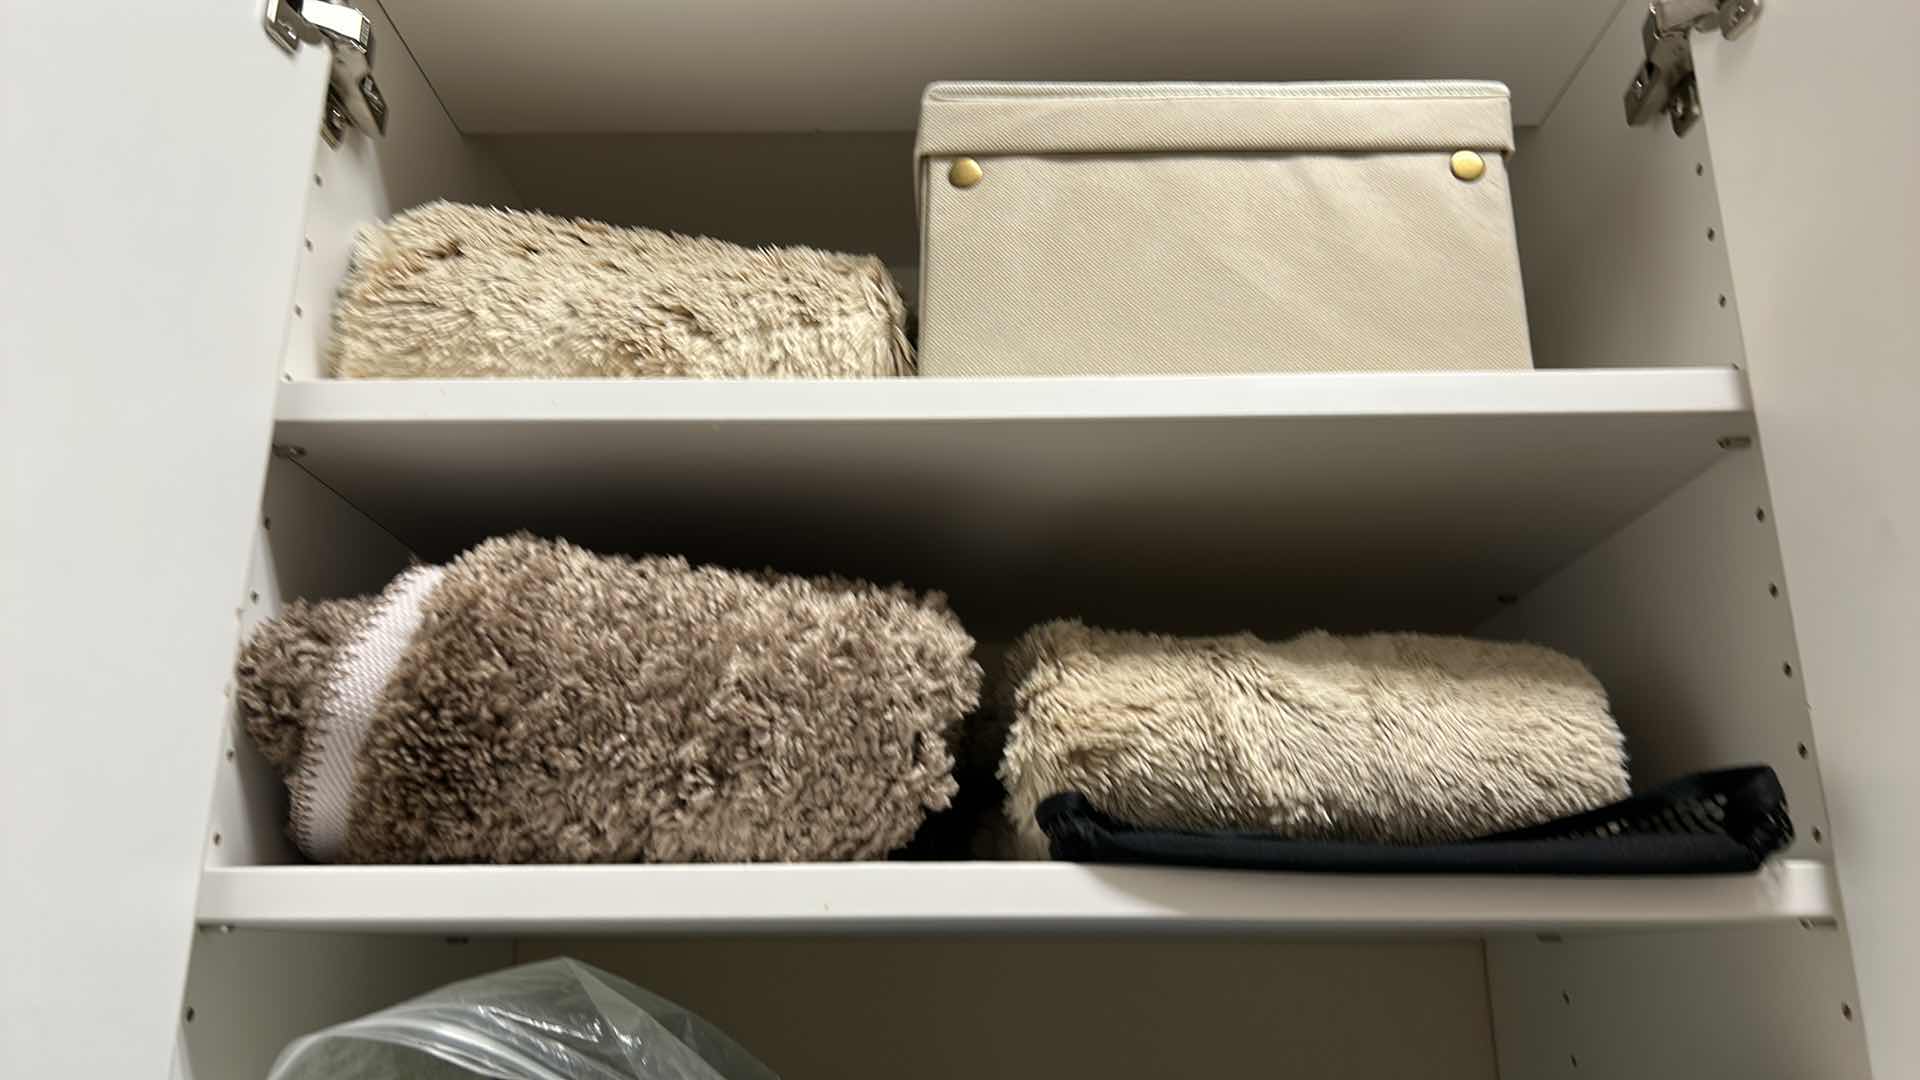 Photo 8 of Contents of cabinet in walk-in closet